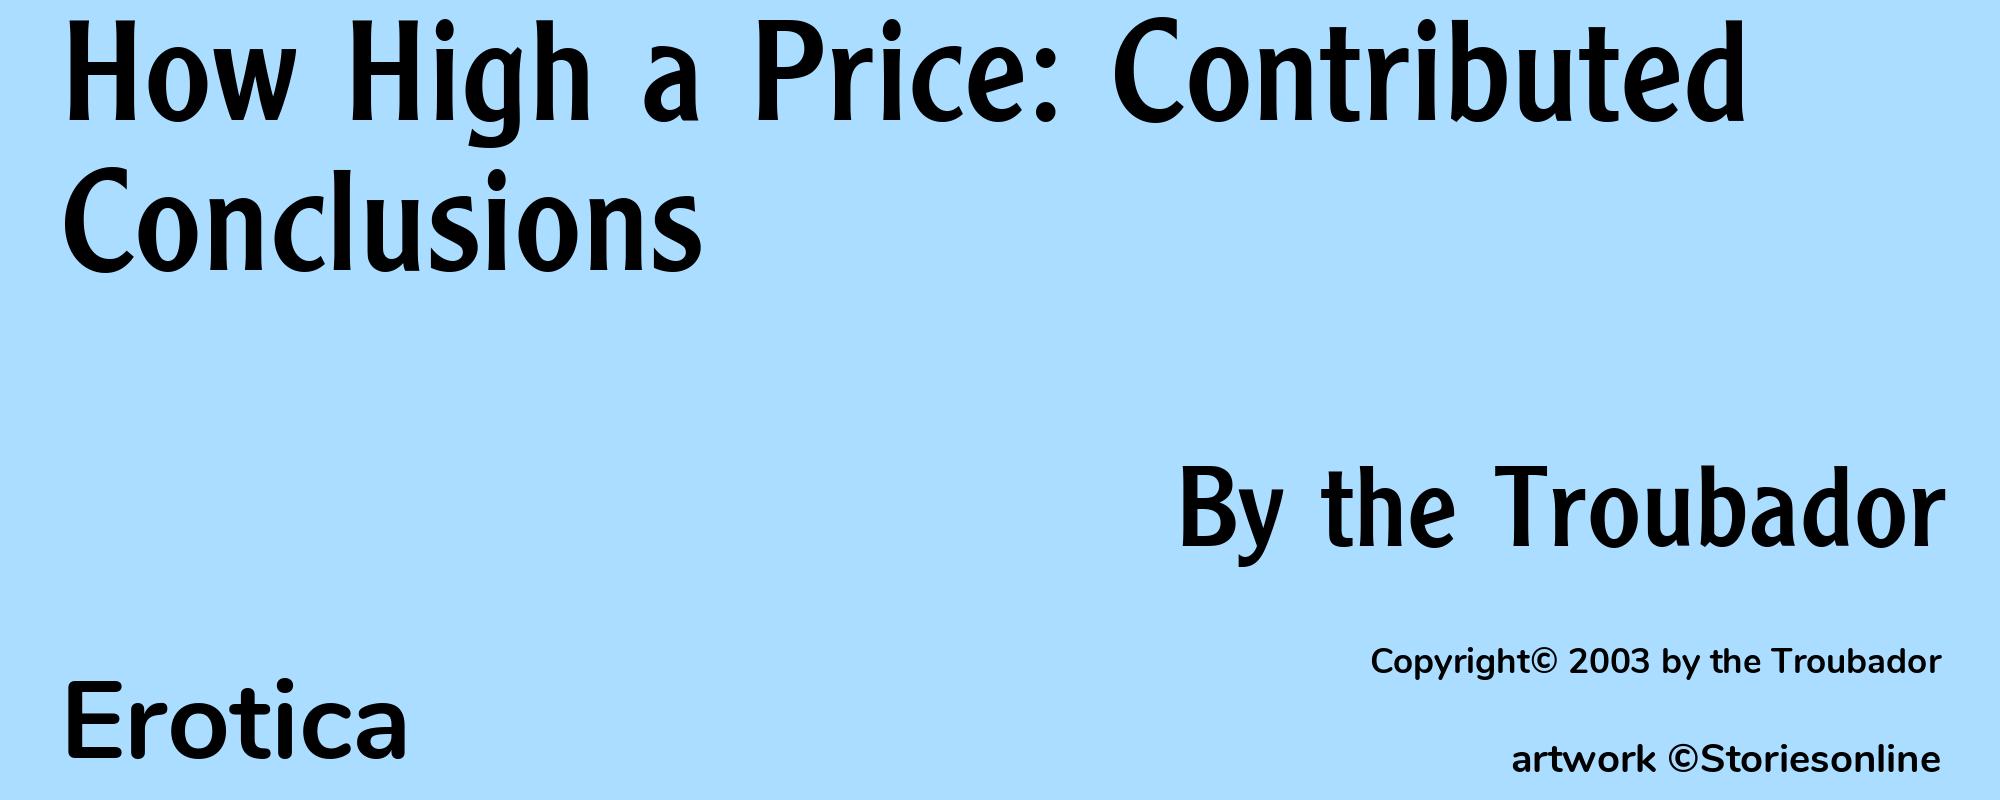 How High a Price: Contributed Conclusions - Cover